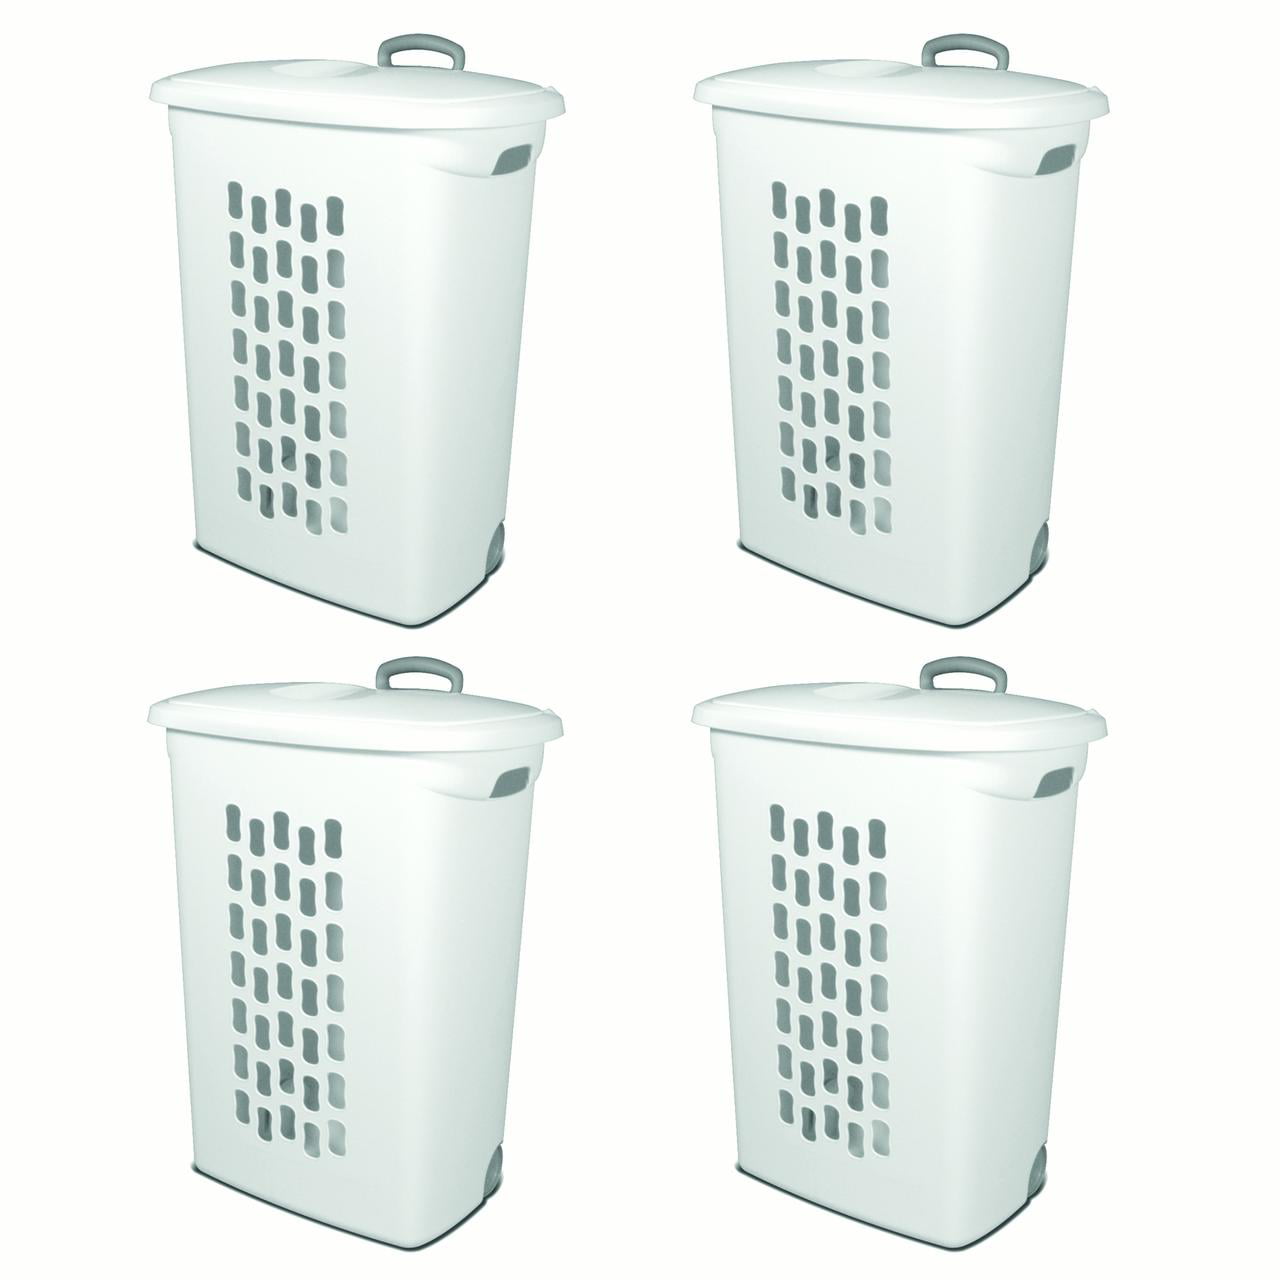 Sterilite Lift-Top Laundry Hampers With Wheels, White, 4 Pack